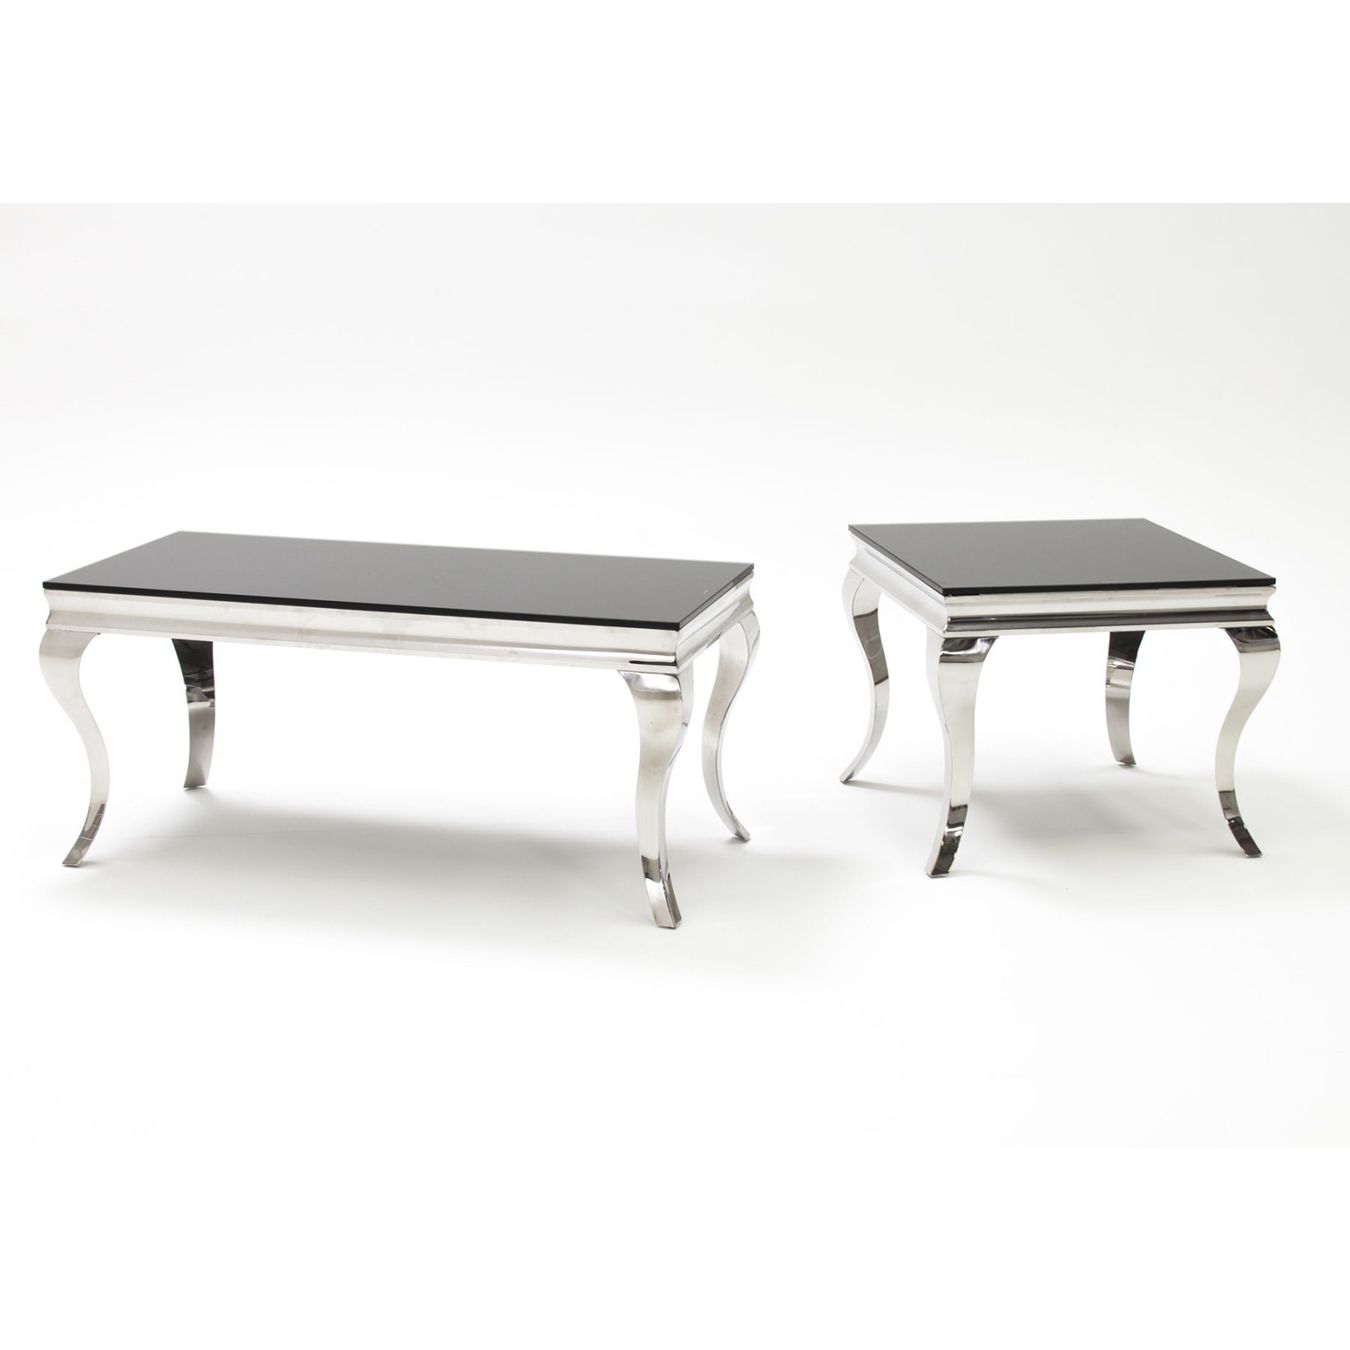 Glass And Stainless Steel Cocktail Tables Regarding 2018 Louis Rectangular Black Glass & Stainless Steel Coffee (View 11 of 20)